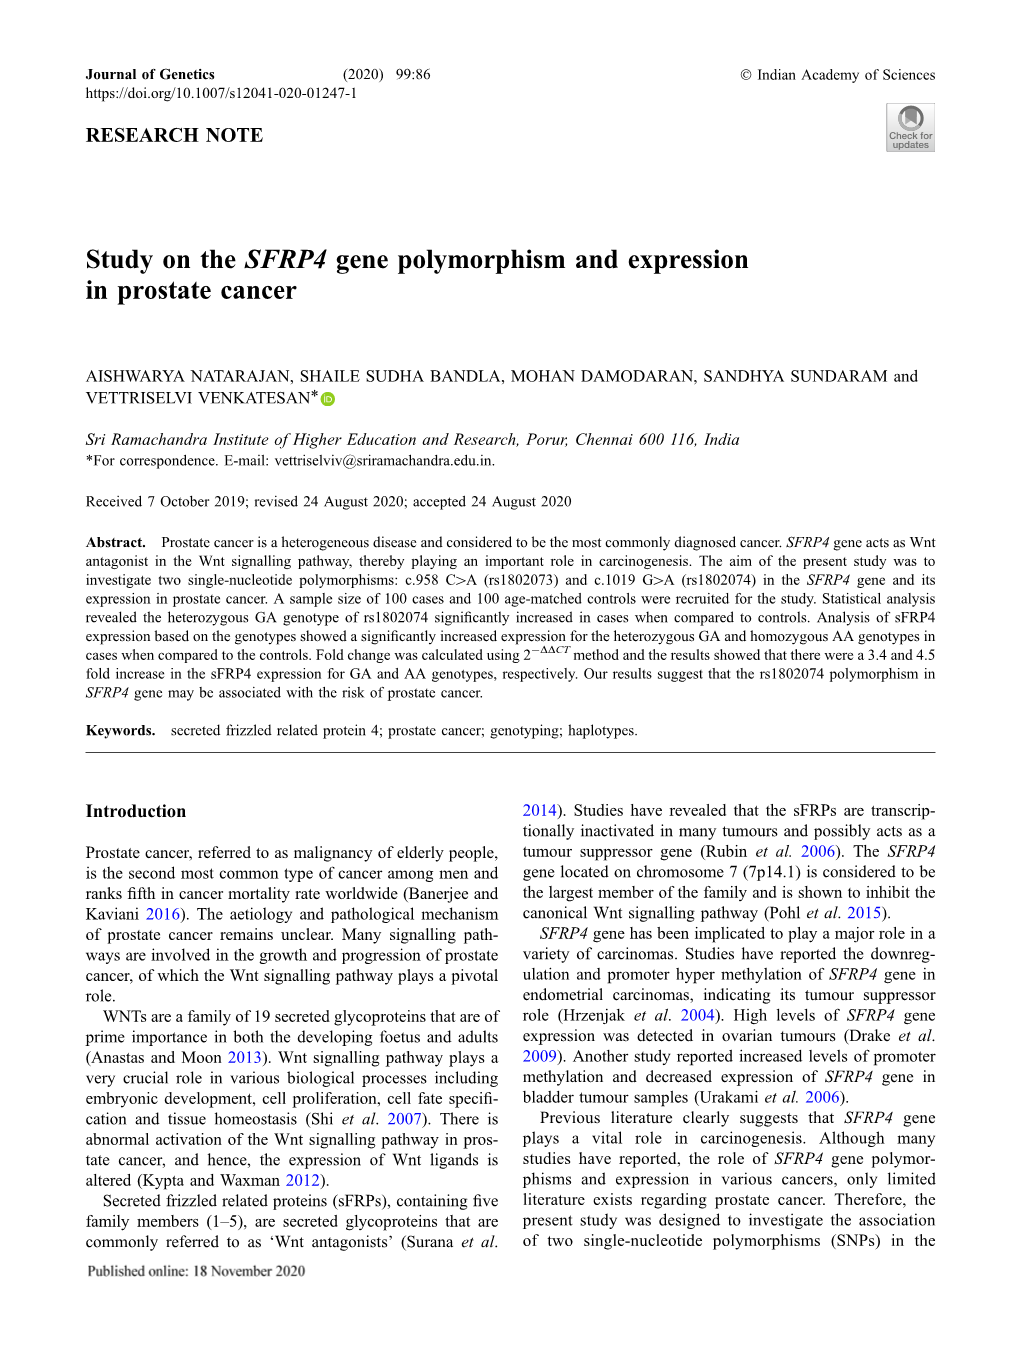 Study on the SFRP4 Gene Polymorphism and Expression in Prostate Cancer